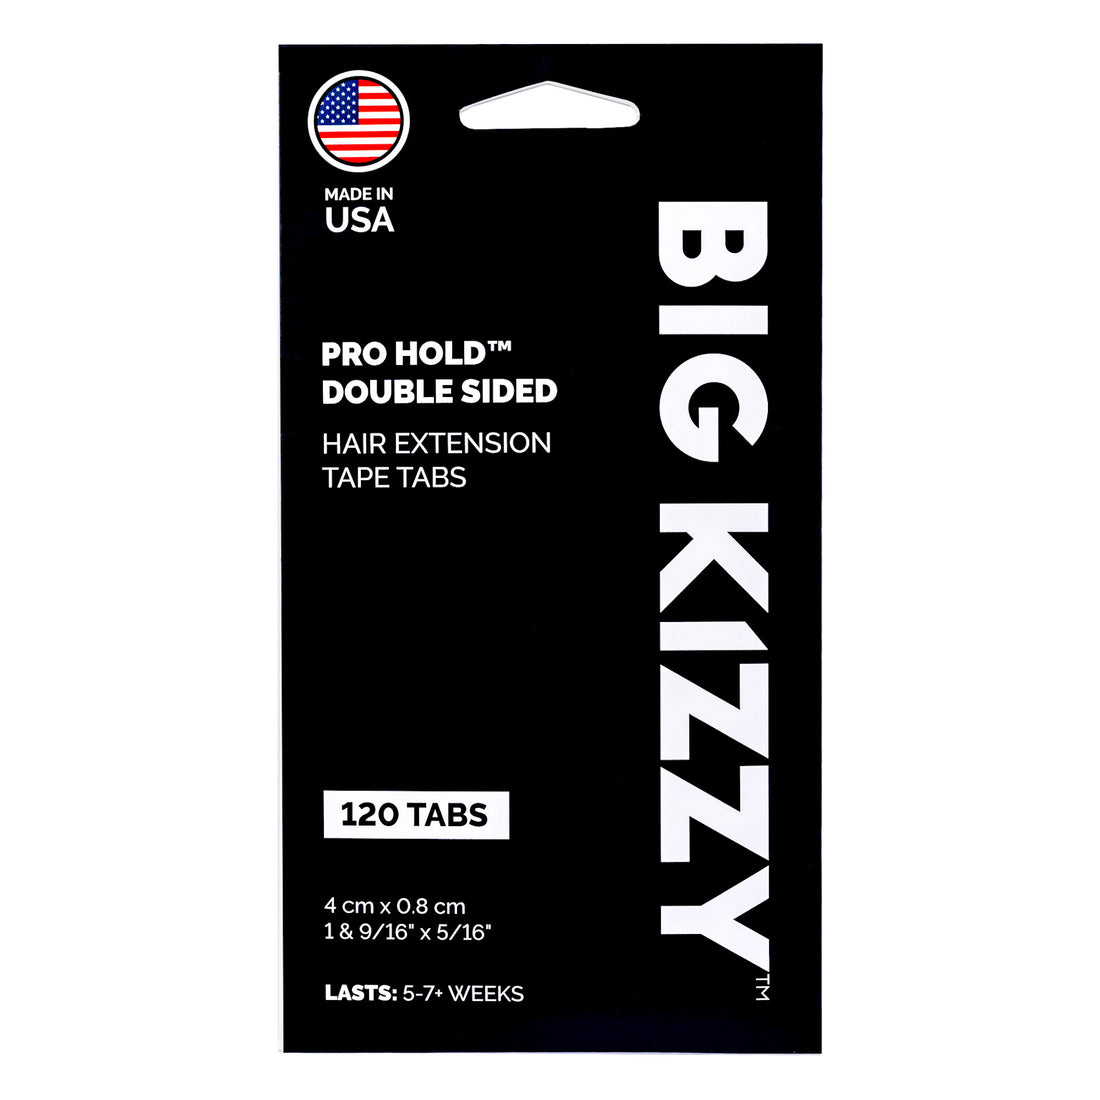 A pack of Big Kizzy® Pro Hold Double Sided Hair Extension Replacement Tape Tabs, 120 tabs